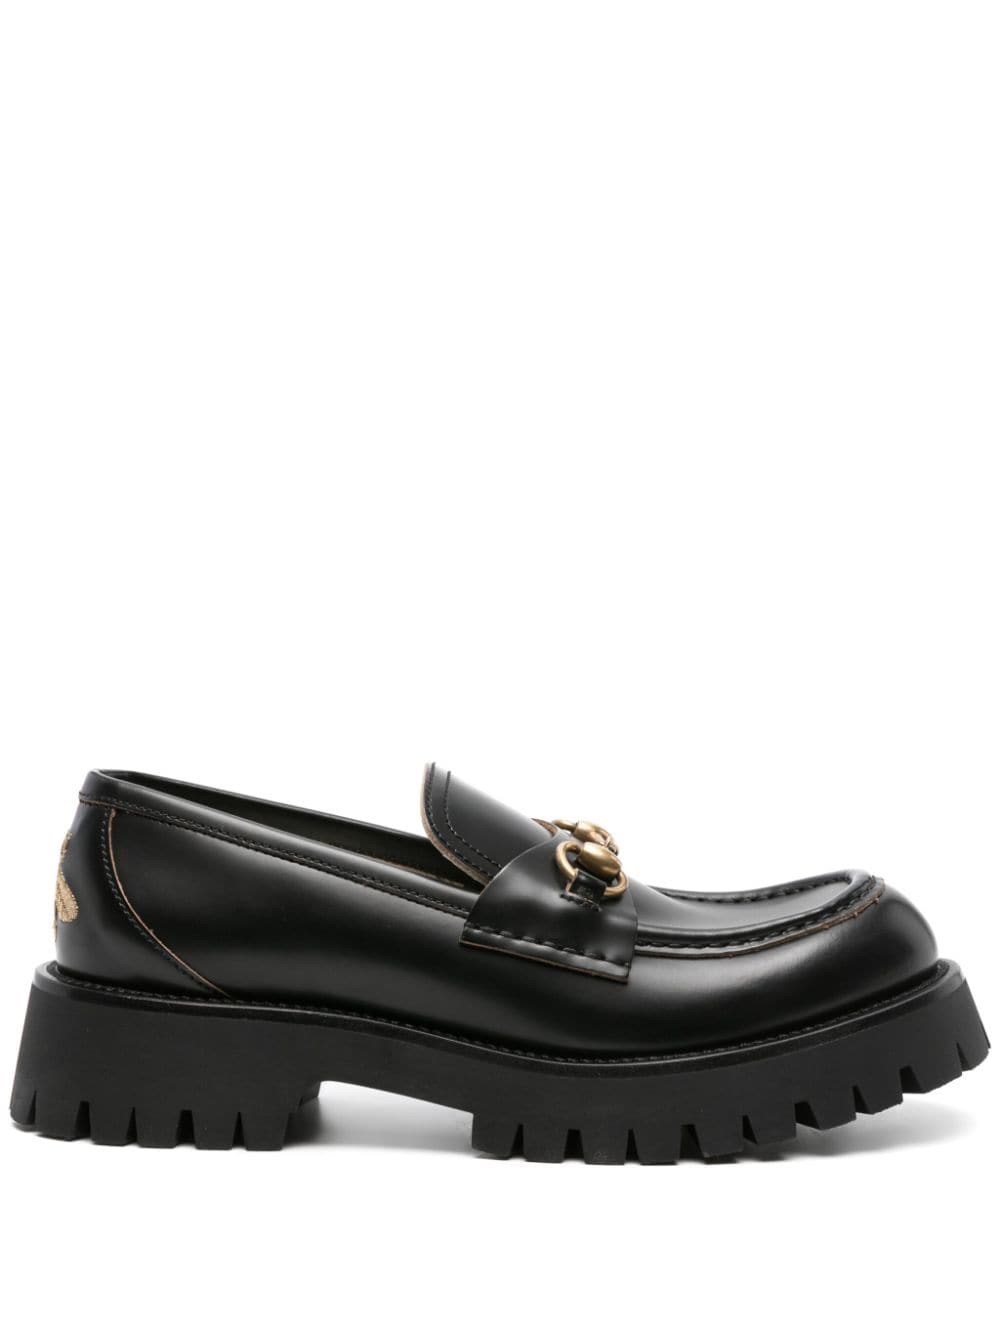 Image 1 of Gucci Horsebit-detail leather loafers